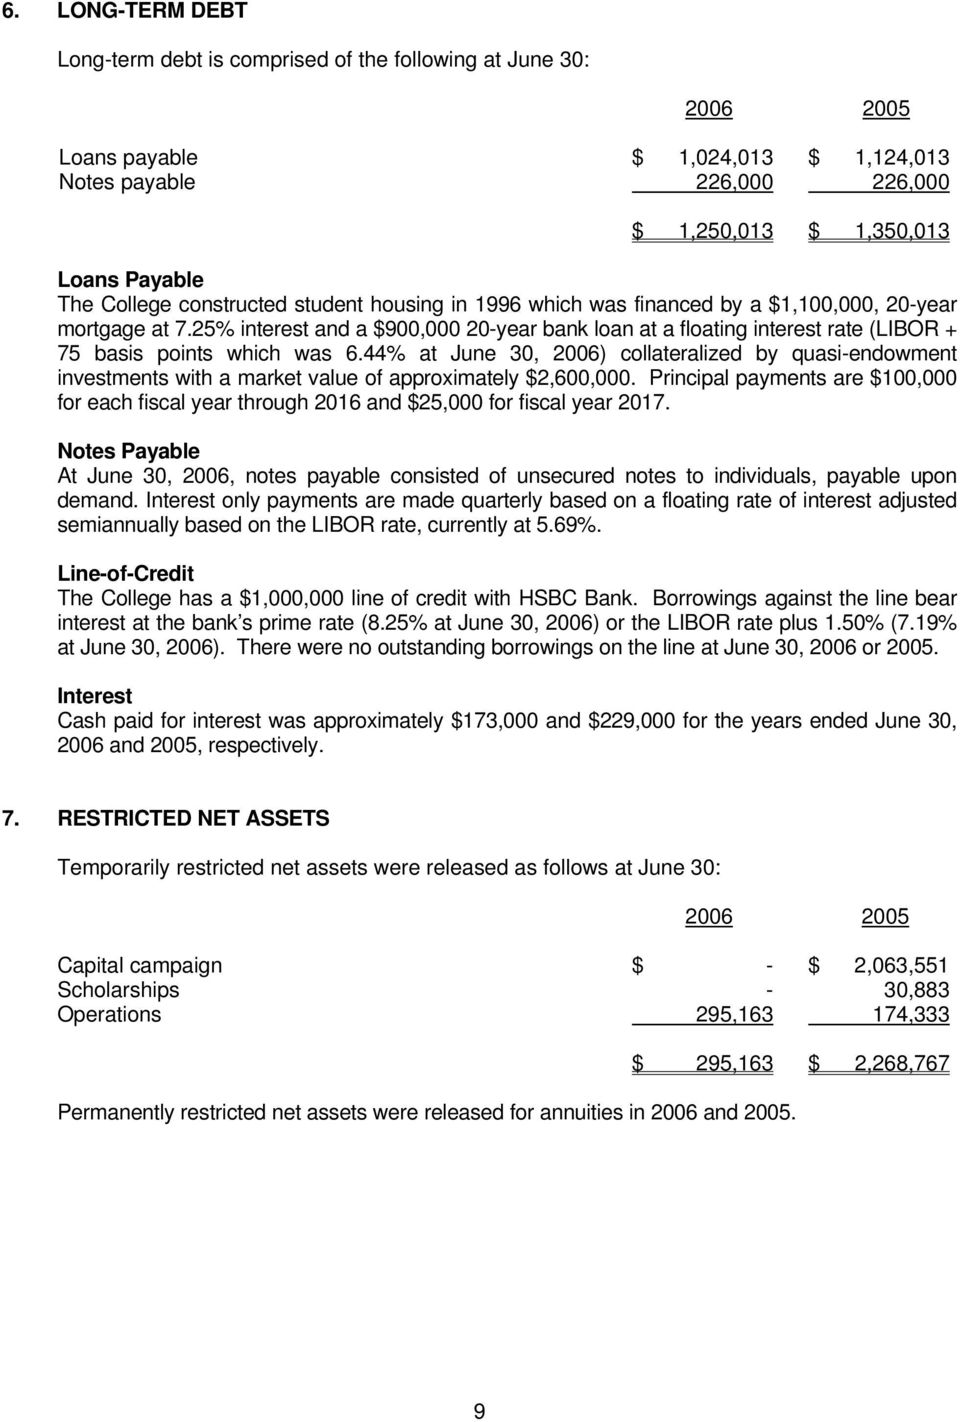 25% interest and a $900,000 20-year bank loan at a floating interest rate (LIBOR + 75 basis points which was 6.